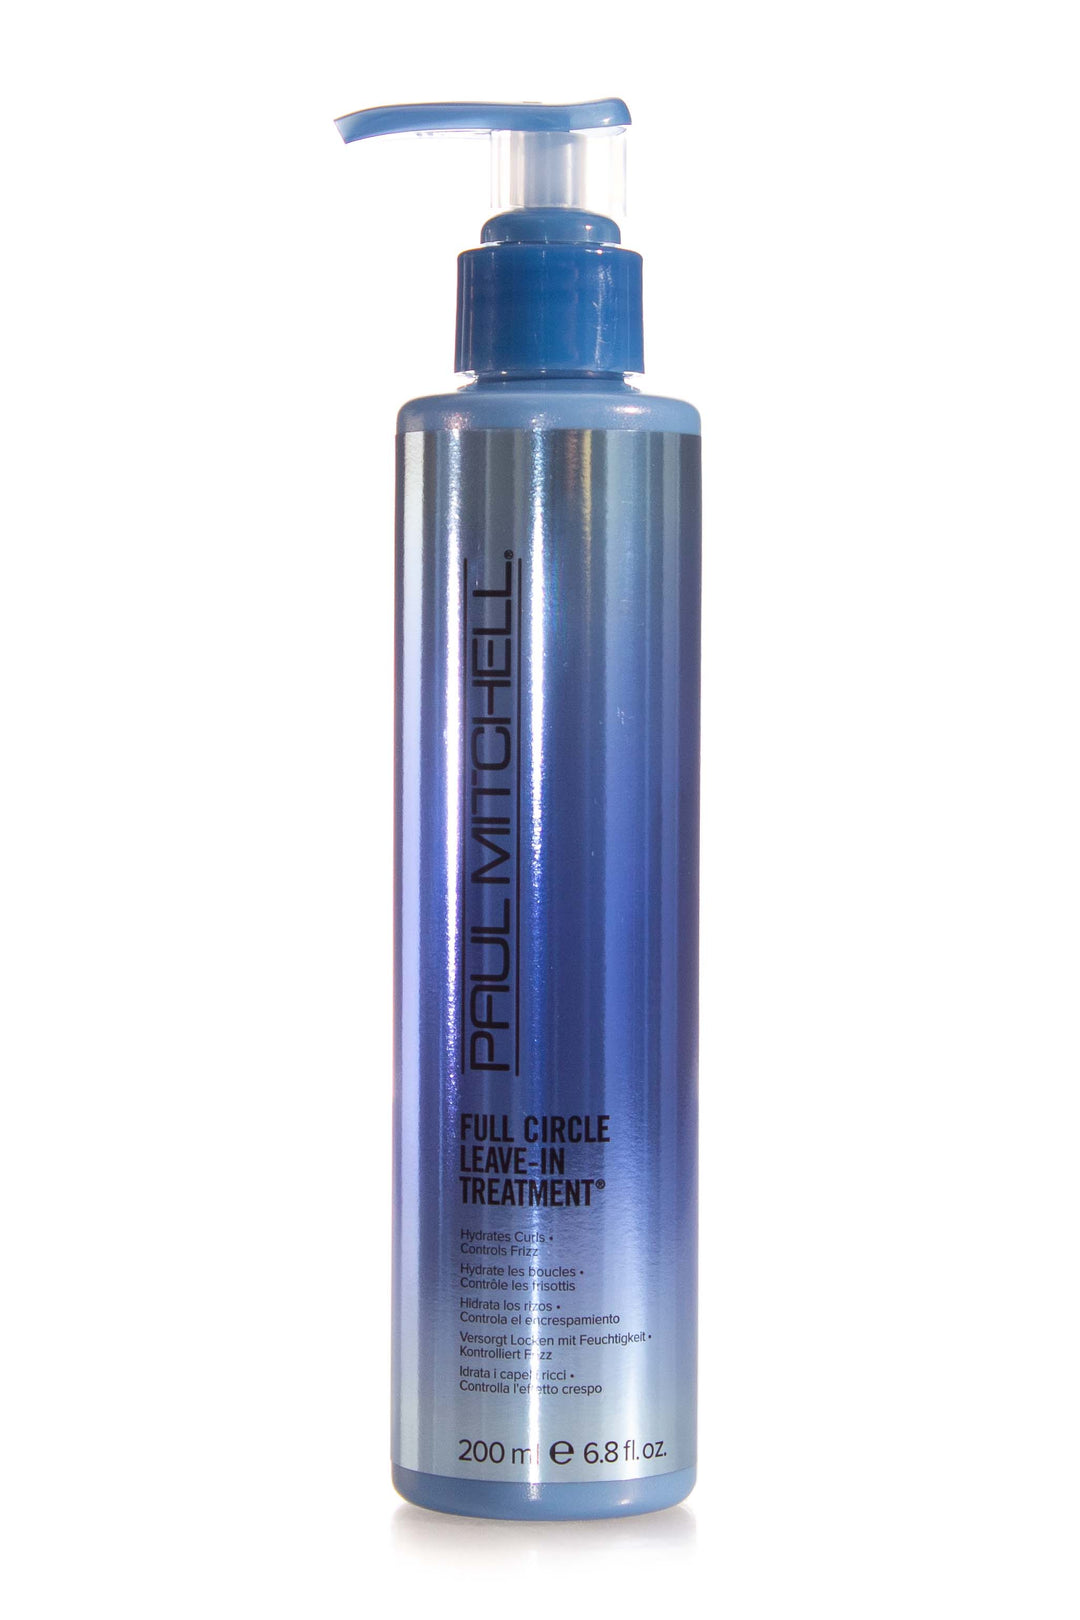 paul-mitchell-full-circle-leave-in-treatment-200ml